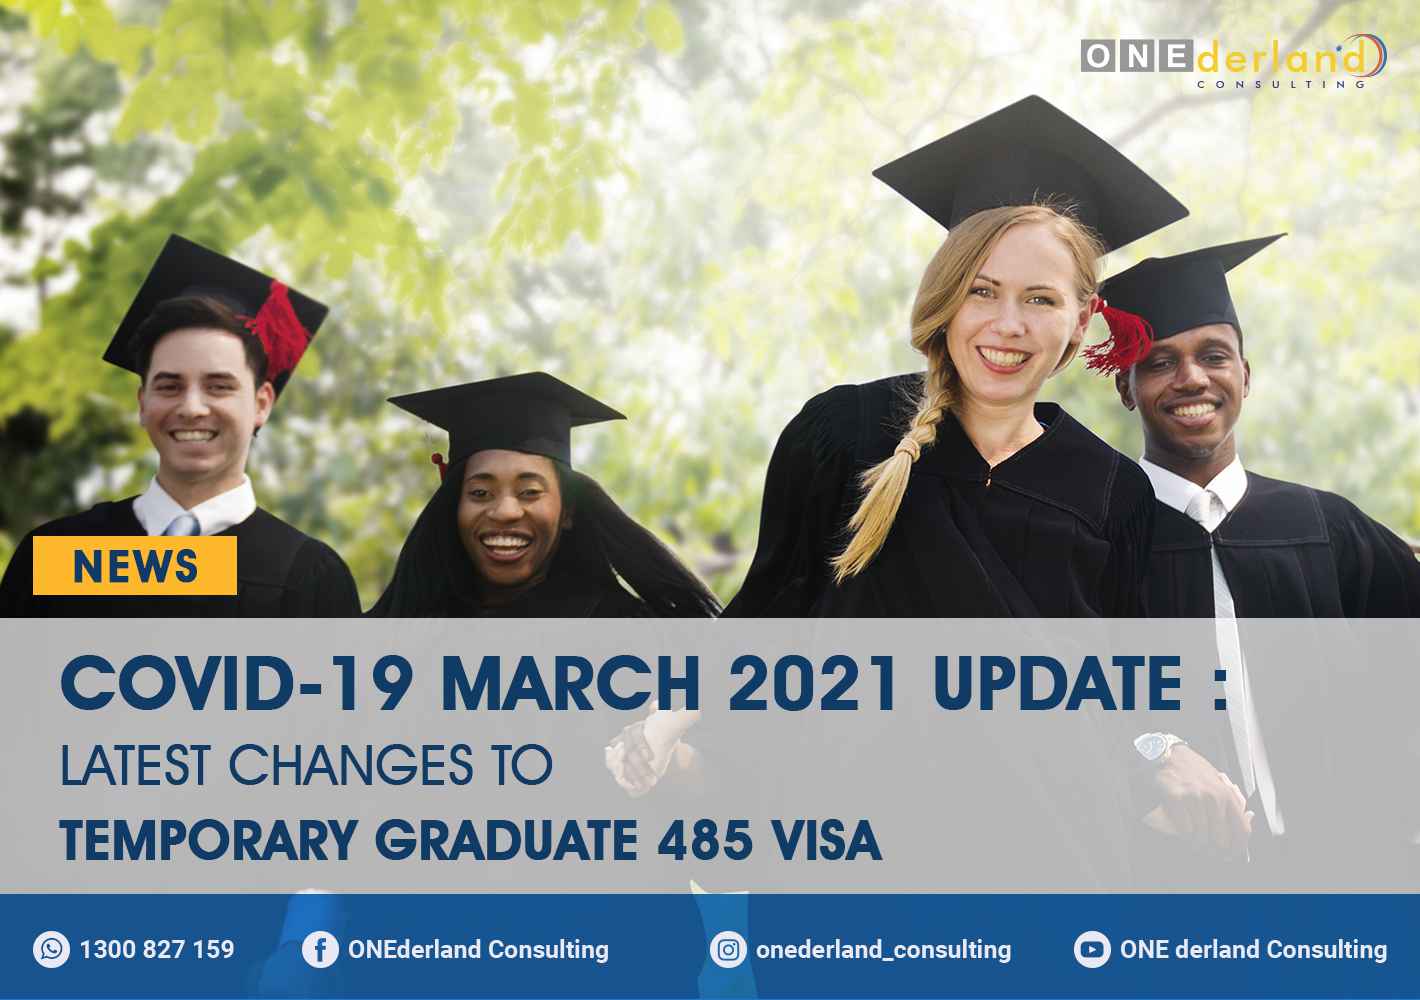 COVID-19 UPDATE March 2021 Changes to Temporary Graduate 485 Visa